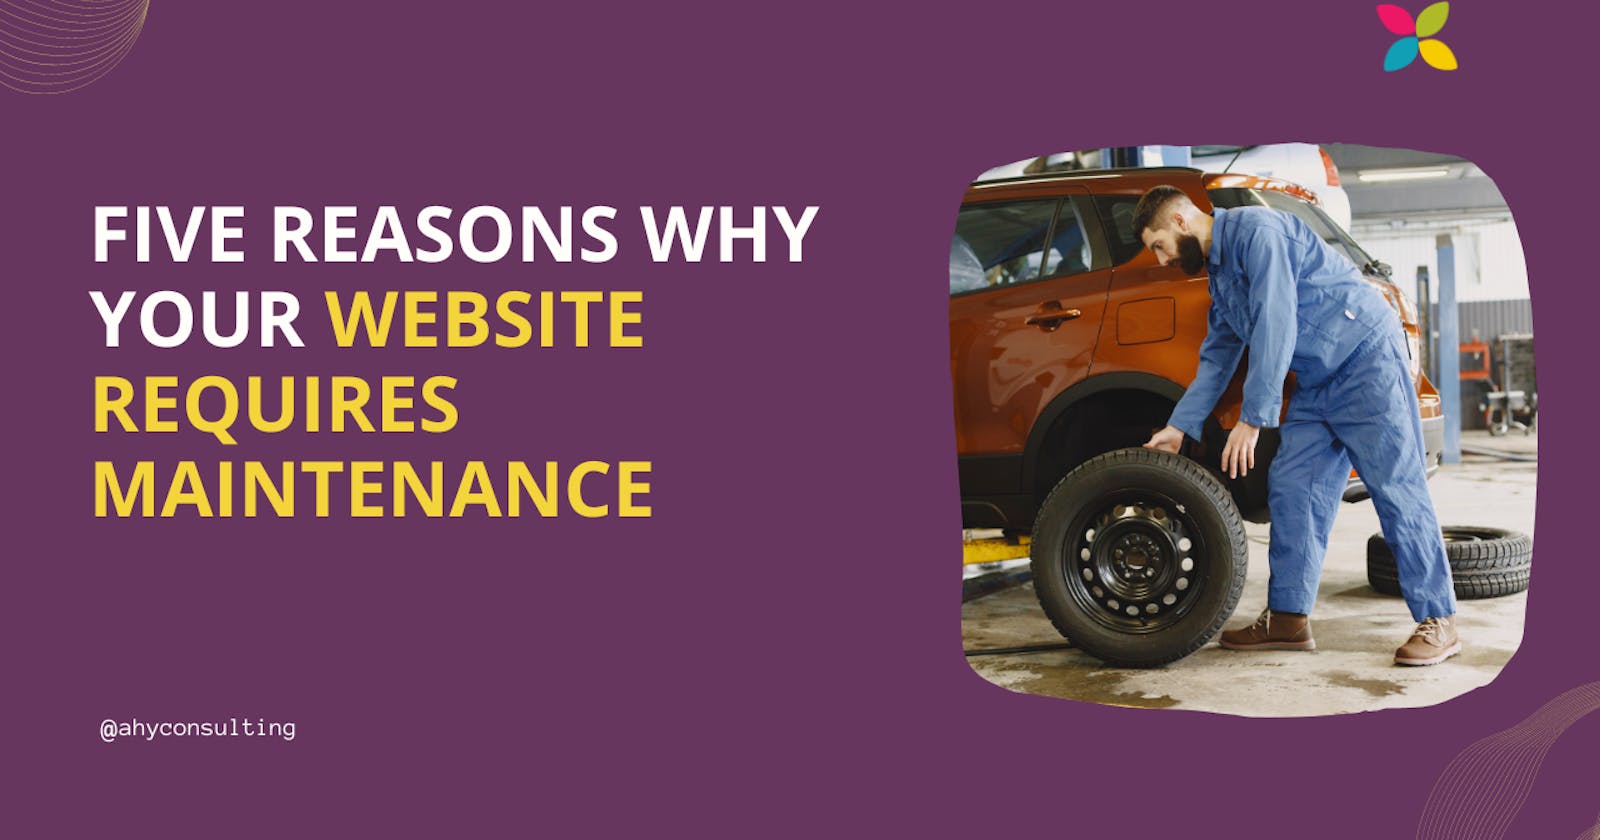 Five Reasons Why Your Website Requires Maintenance: Ensuring Peak Performance and User Satisfaction